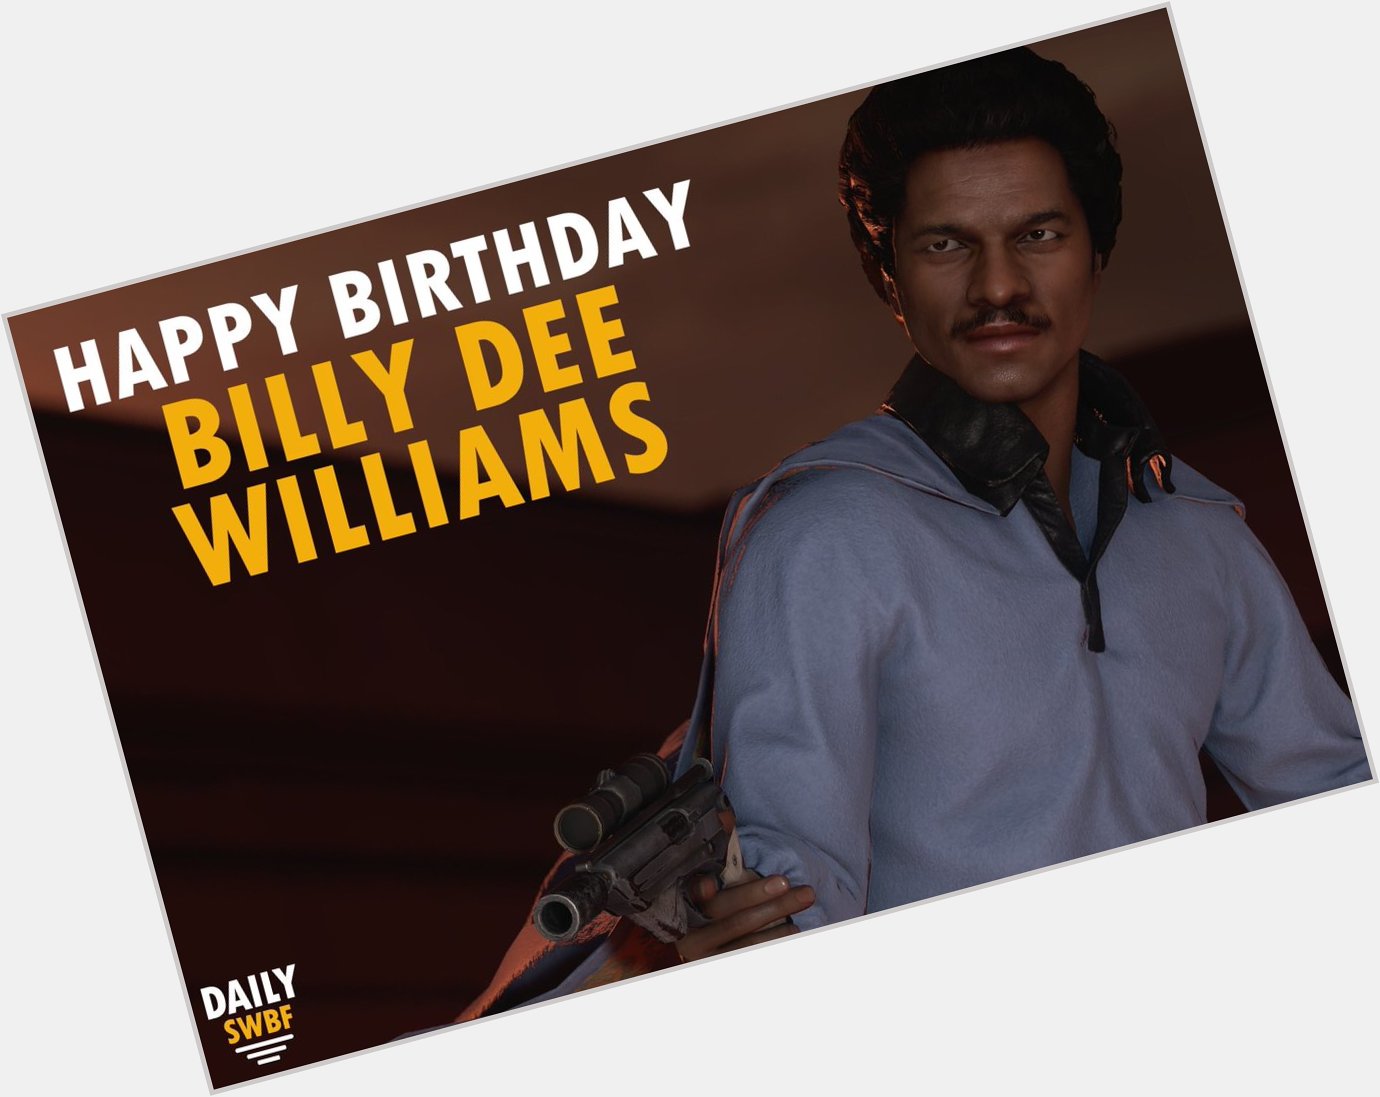 Happy Birthday to smoothest gambler in the galaxy, Billy Dee Williams! 